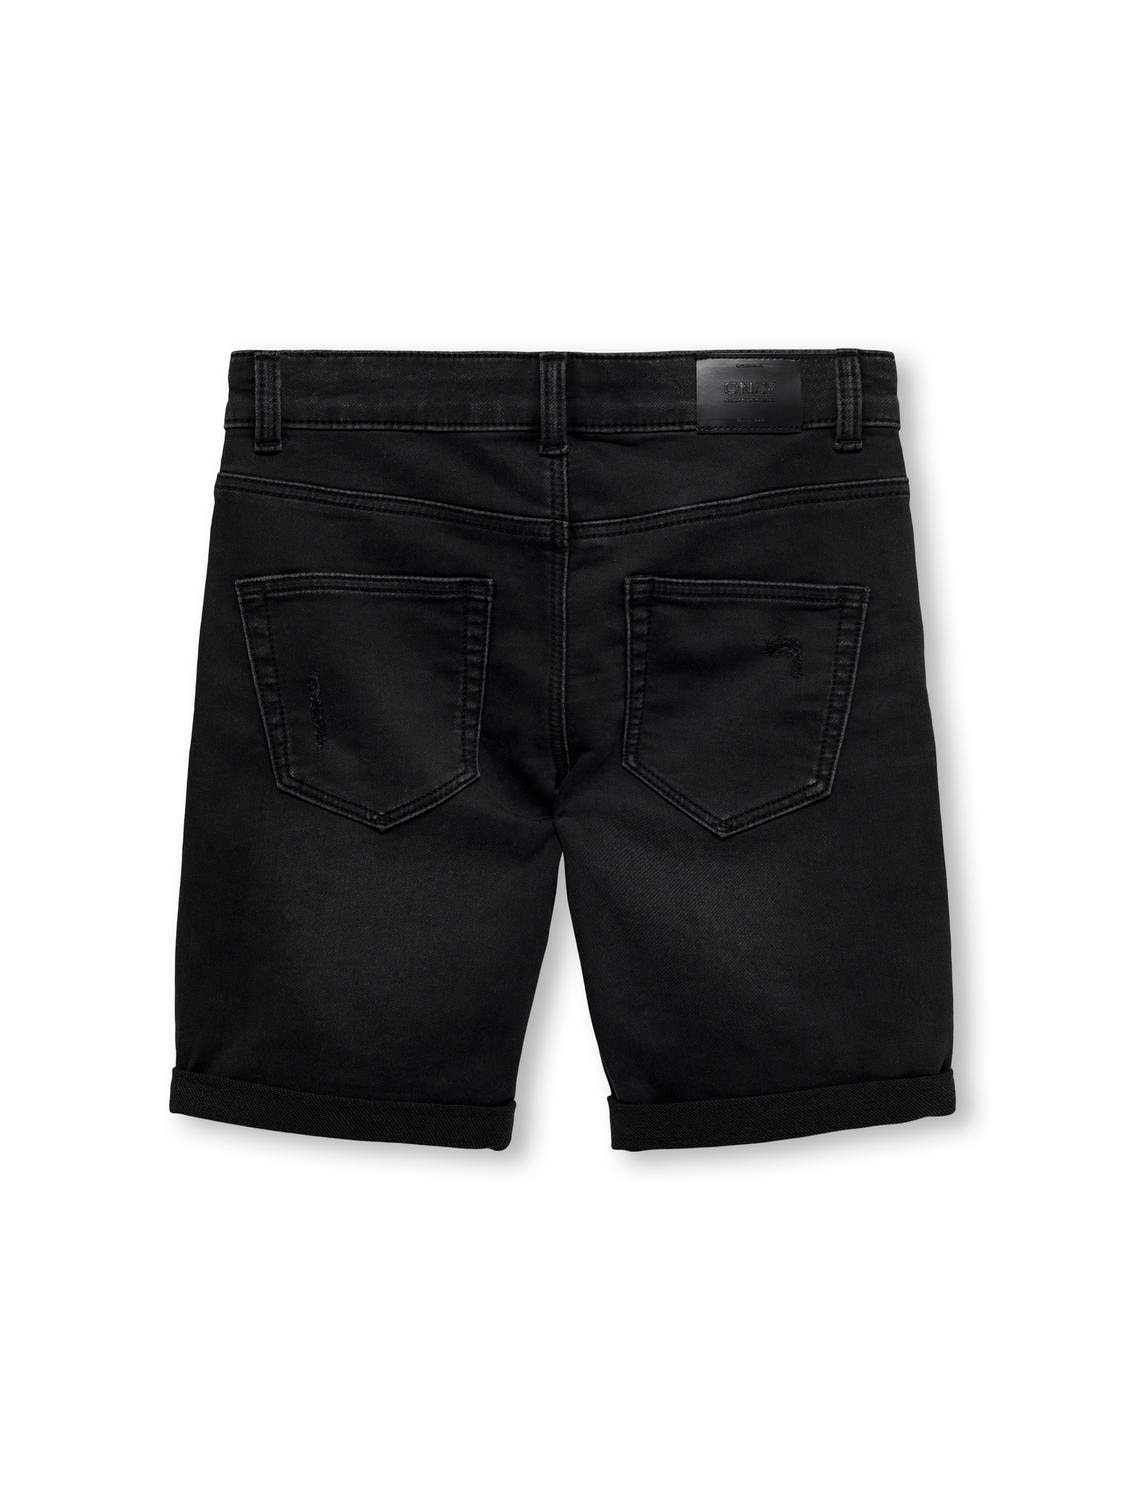 ONLY Shorts Regular Fit Bordi con risvolto -Washed Black - 15283199